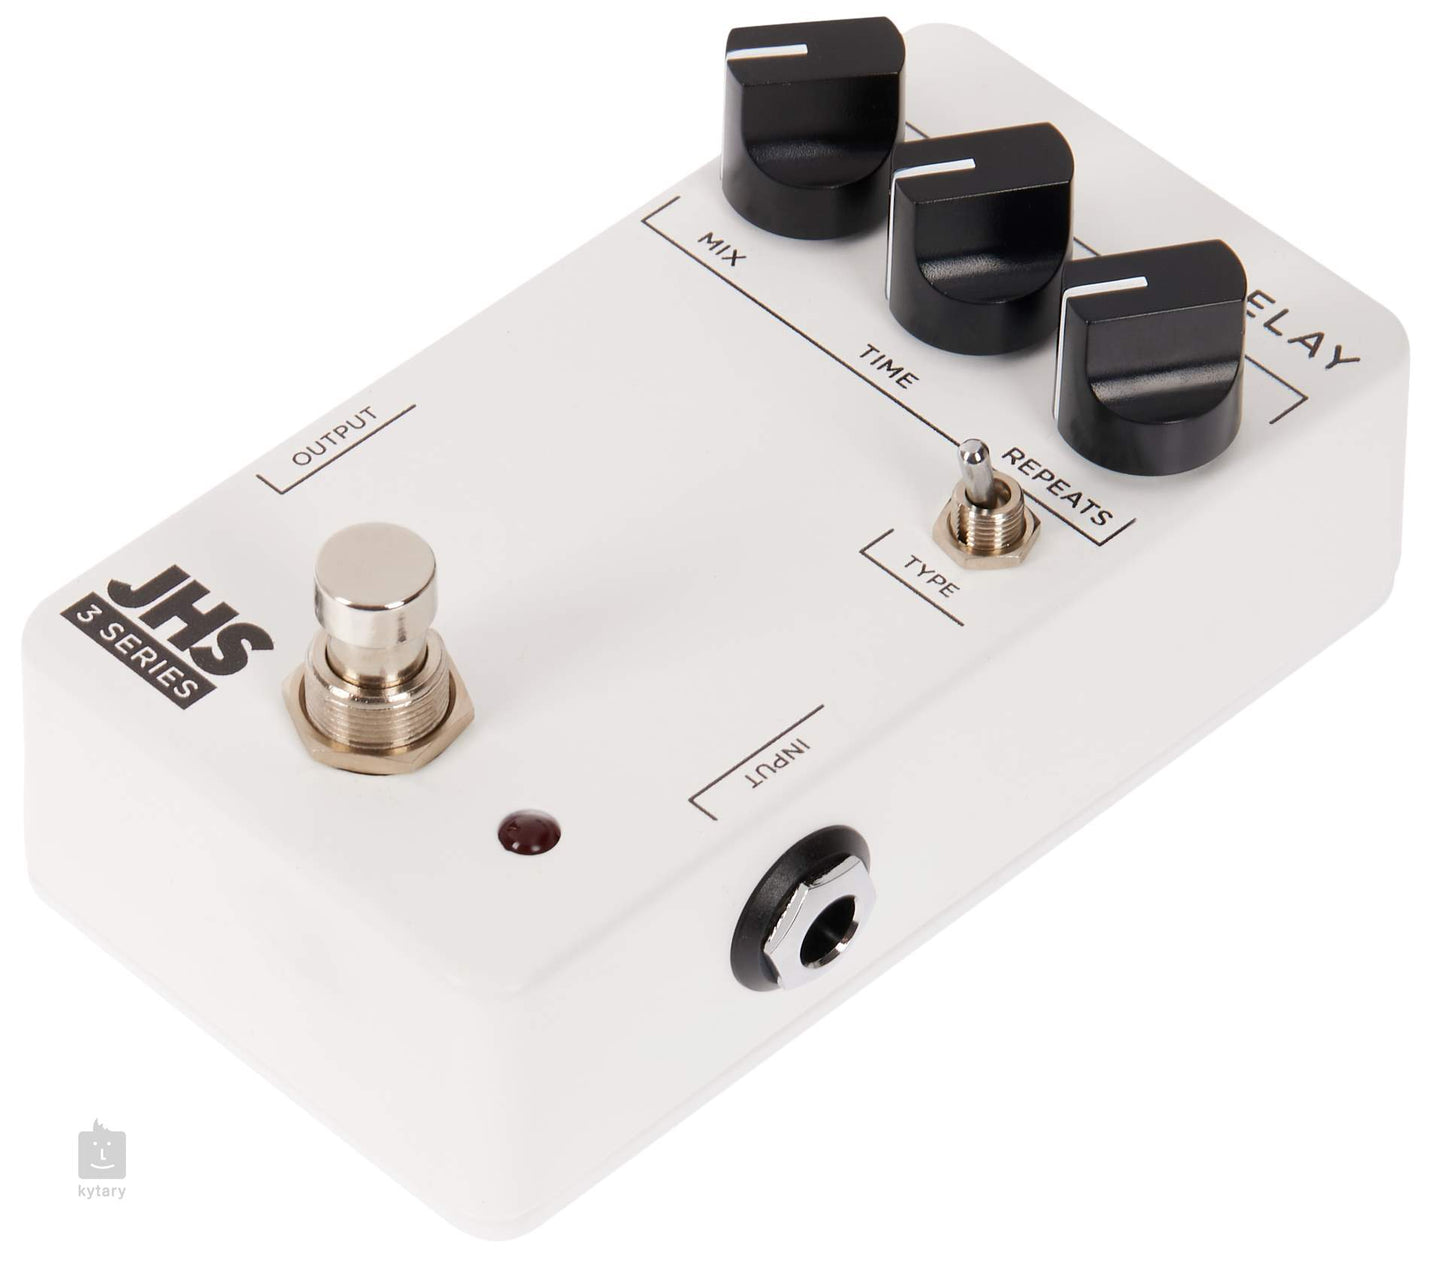 JHS 3 Series Delay Guitar Effects Pedal